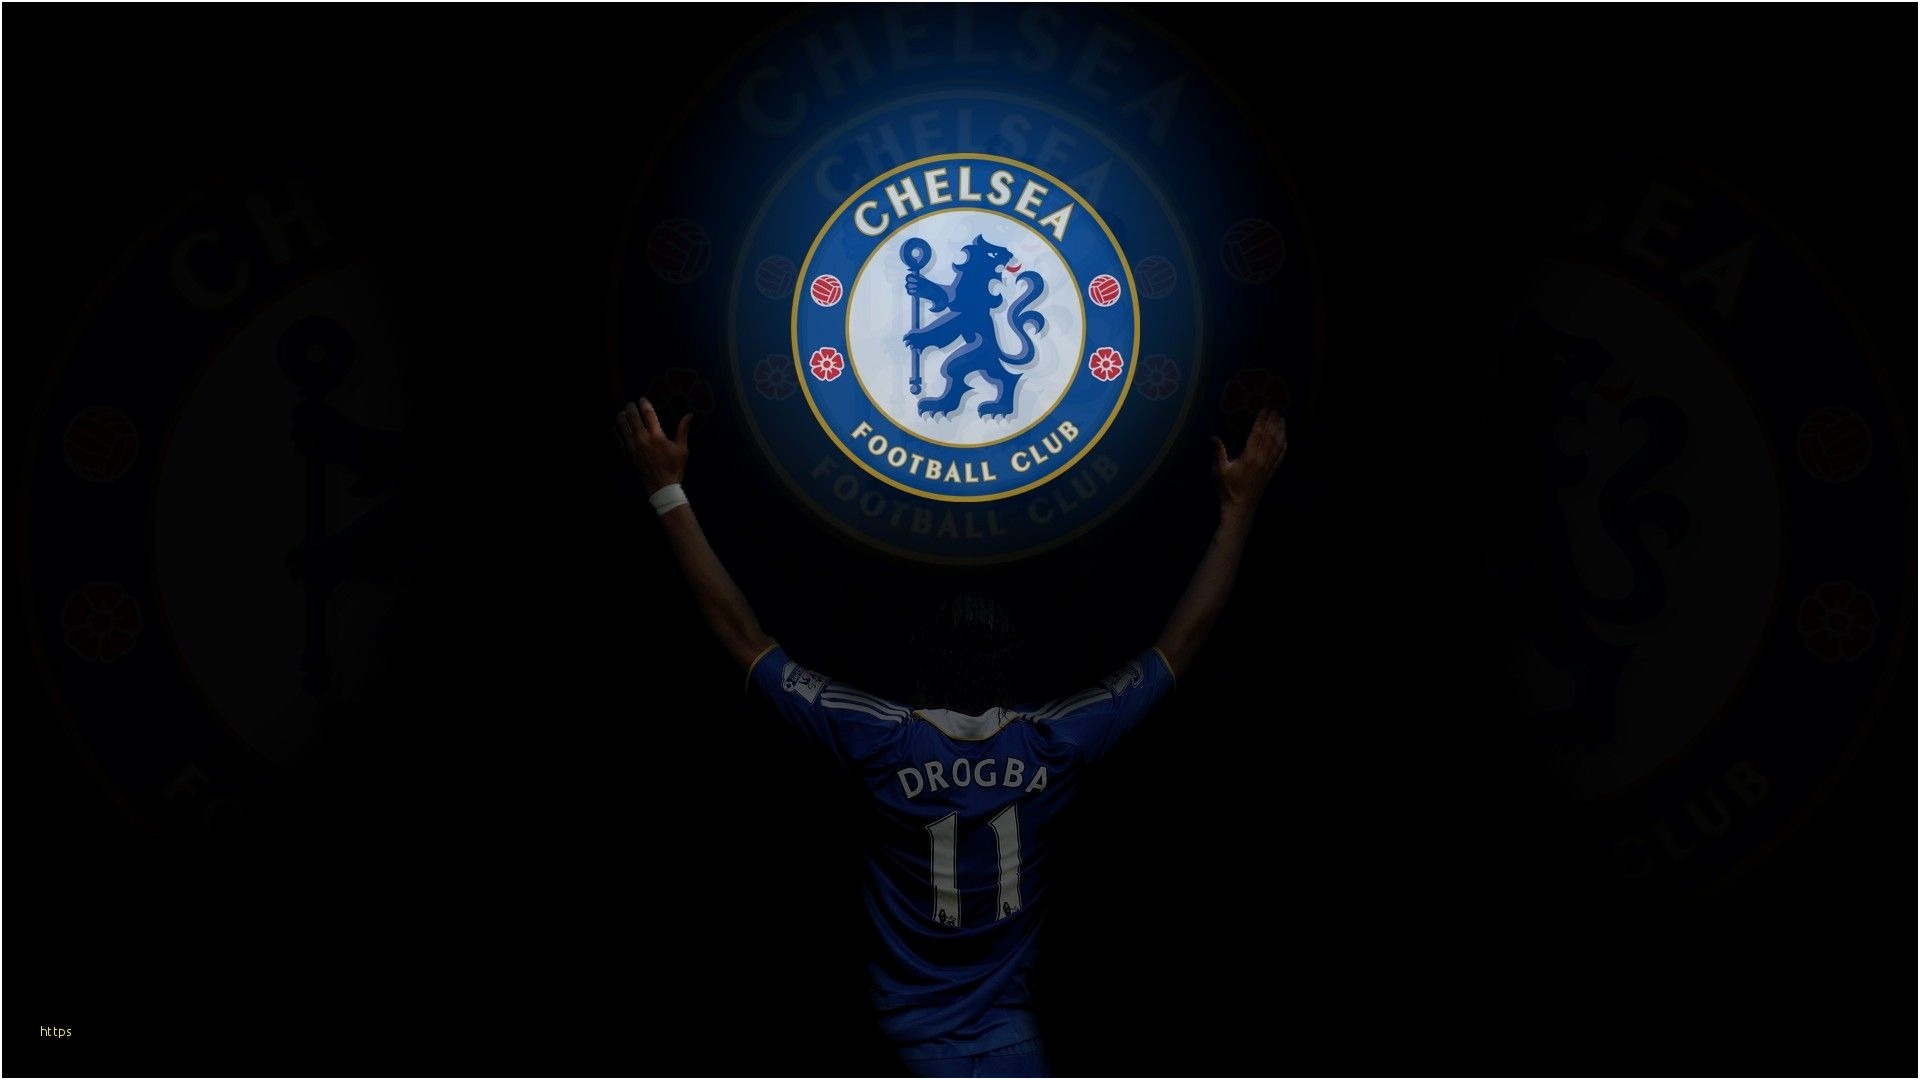 Chelsea: Won back-to-back Premier League titles in 2005 and 2006. 1920x1080 Full HD Wallpaper.